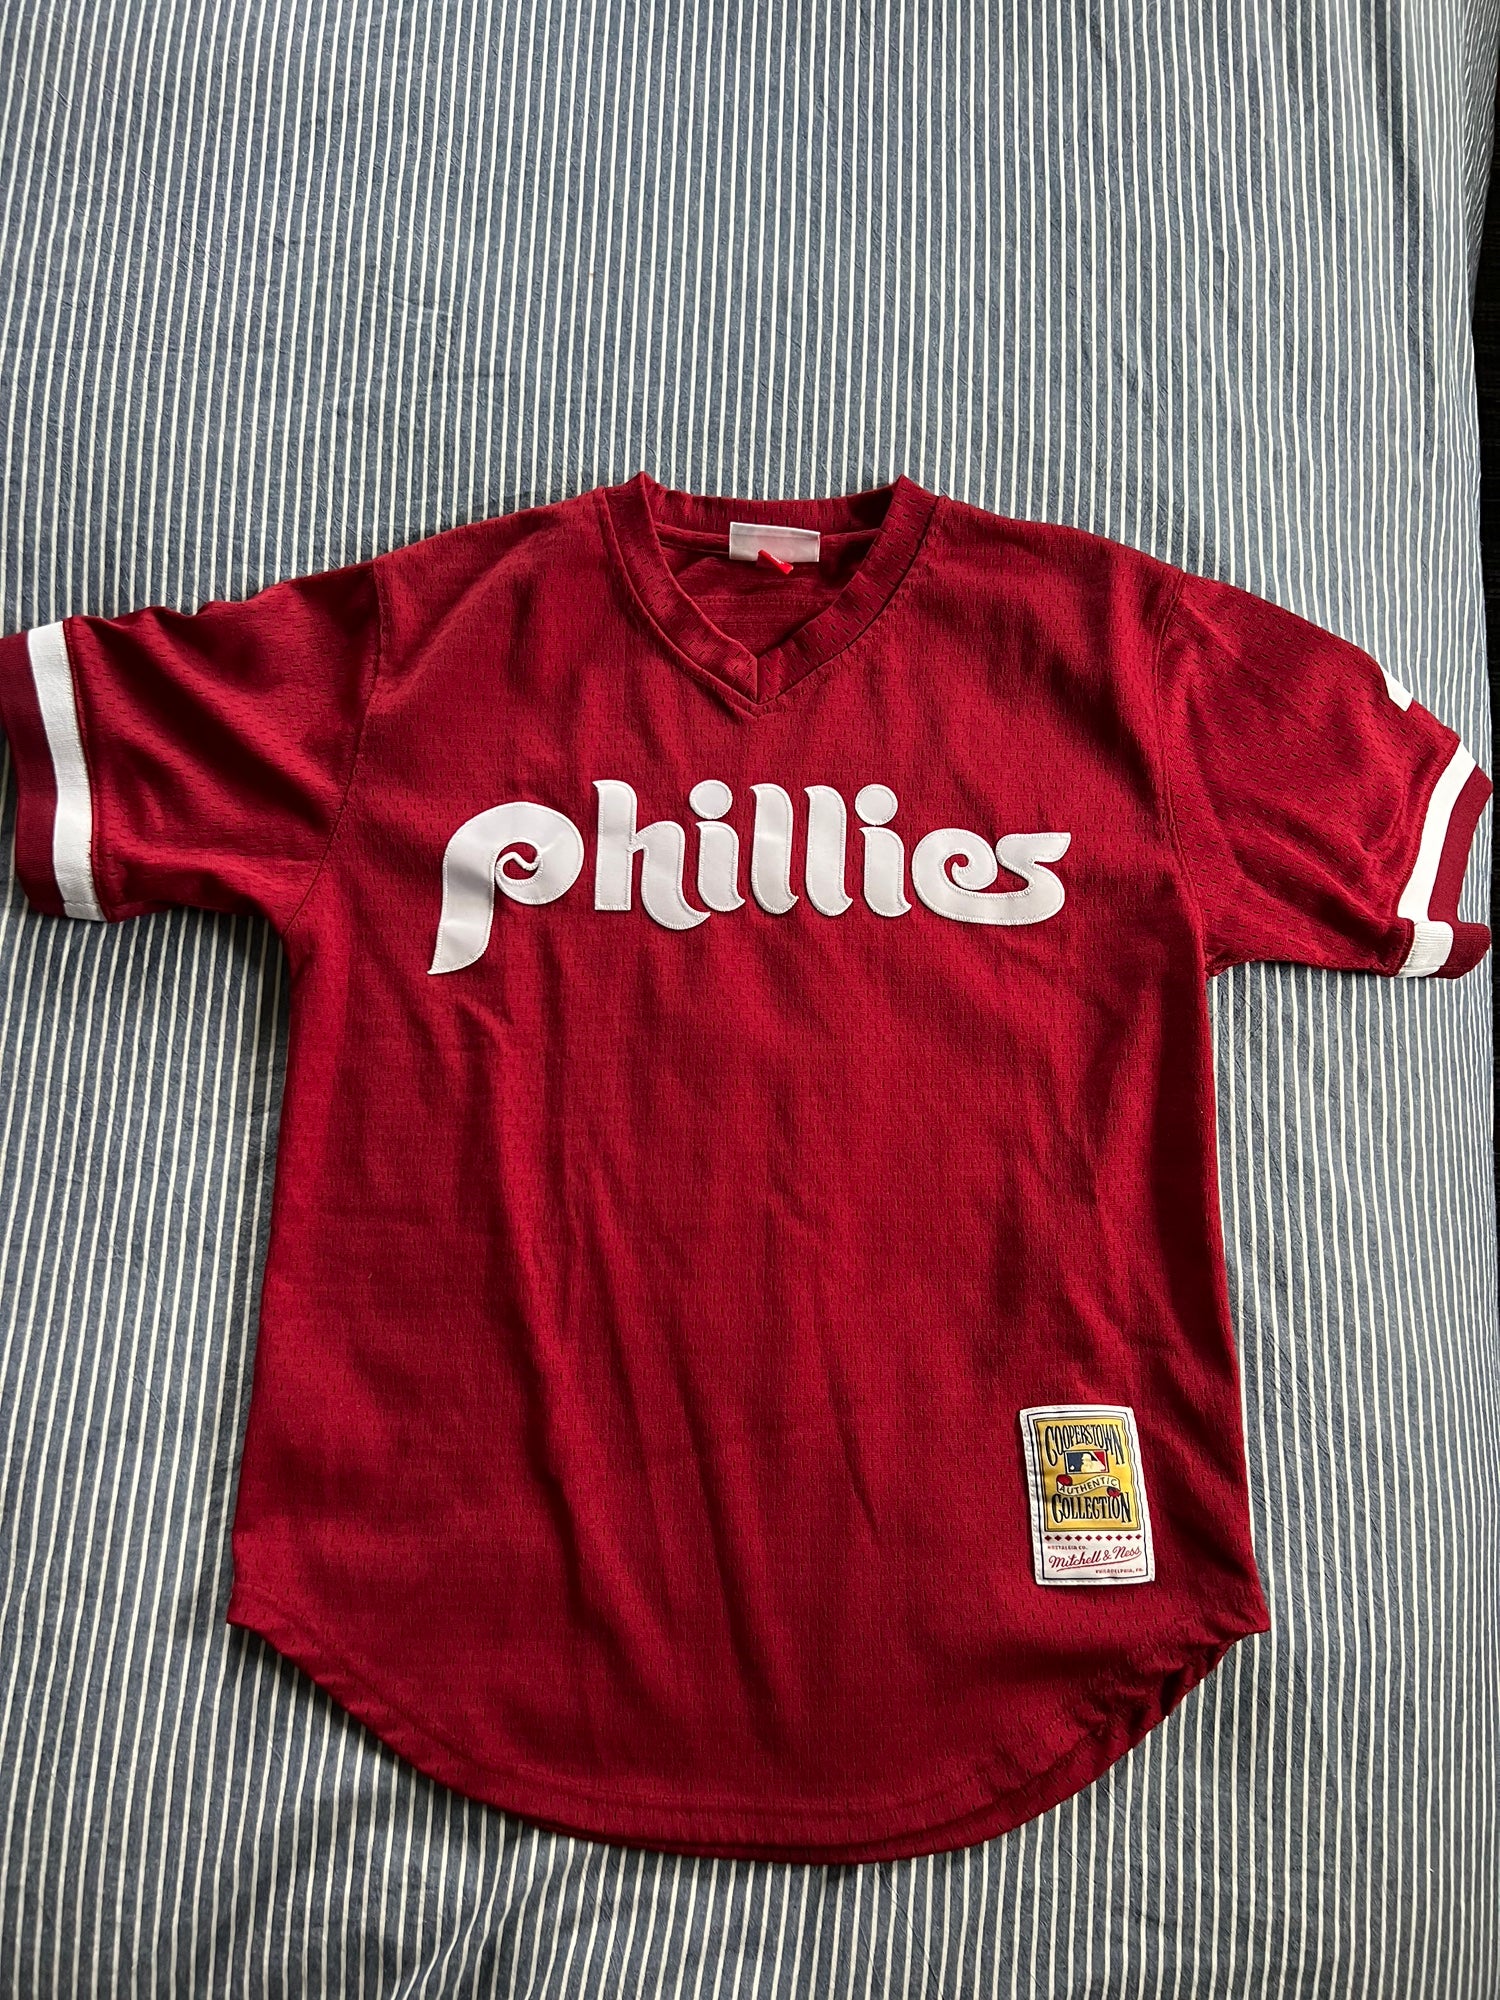 Shop Red Mens Mitchell & Ness MLB Authentic BP Jersey Phillies Lenny Dykstra